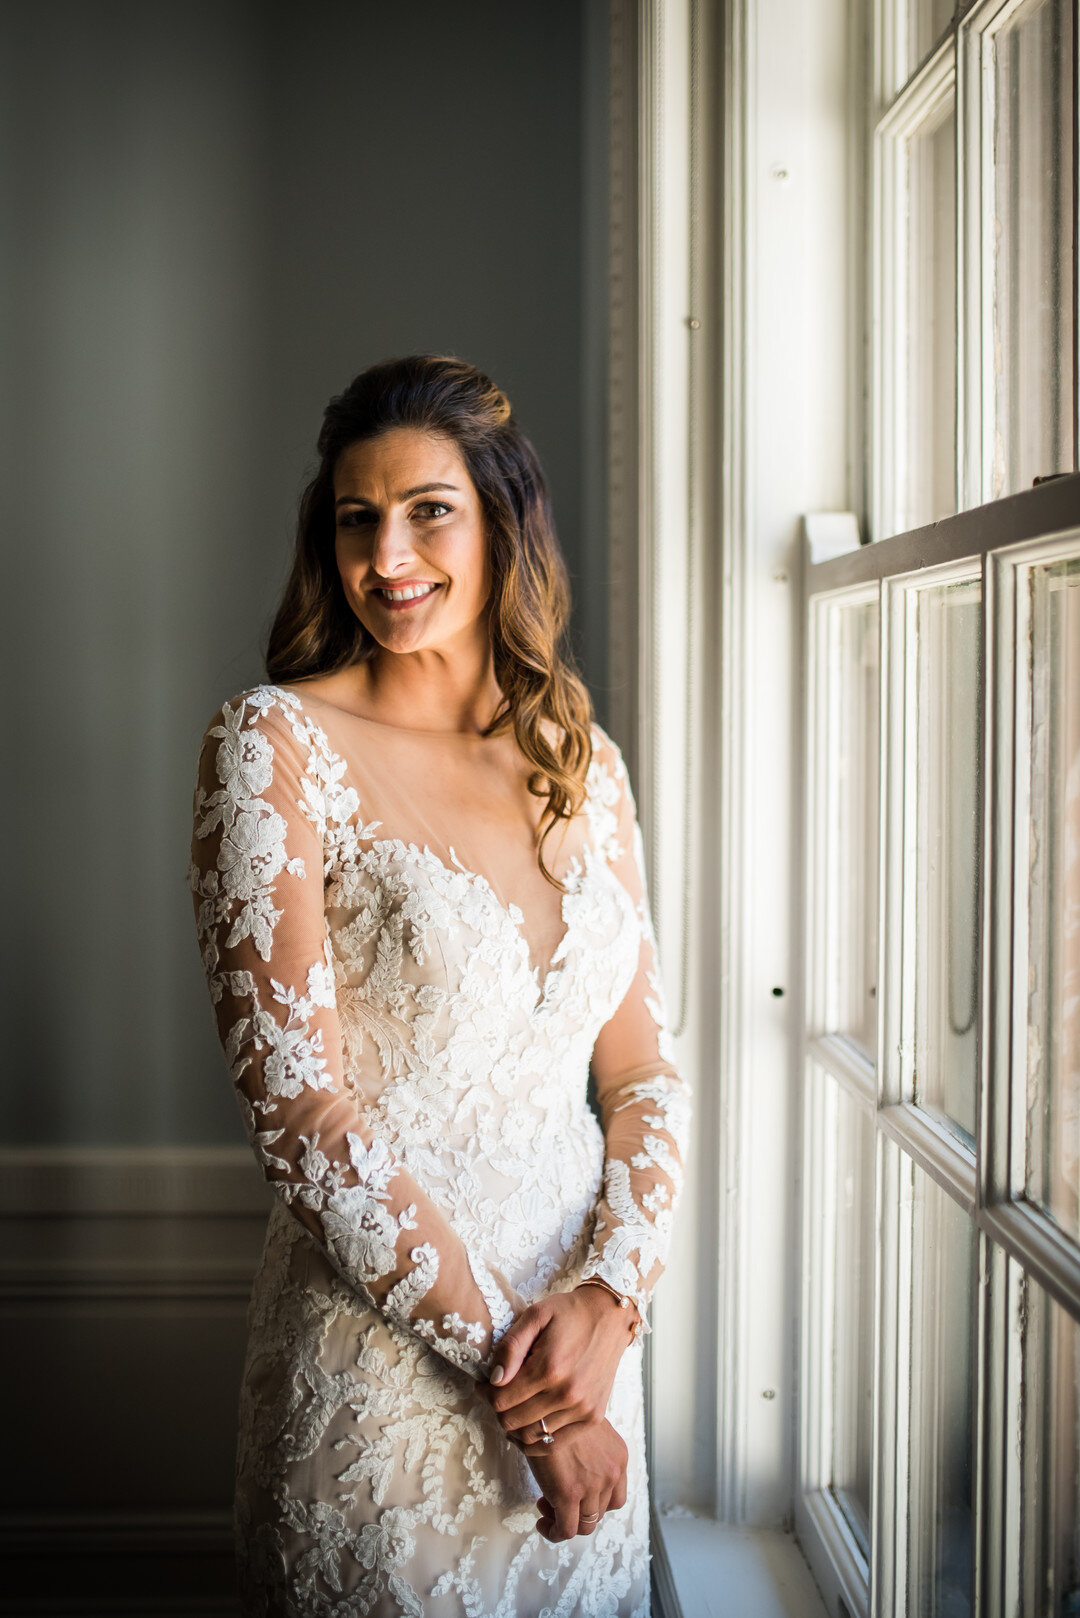 Bridal portrait: Golden Hour Armour House Chicago Wedding captured by Inspired Eye Photography featured on CHI thee WED. Find more wedding ideas at CHItheeWED.com!